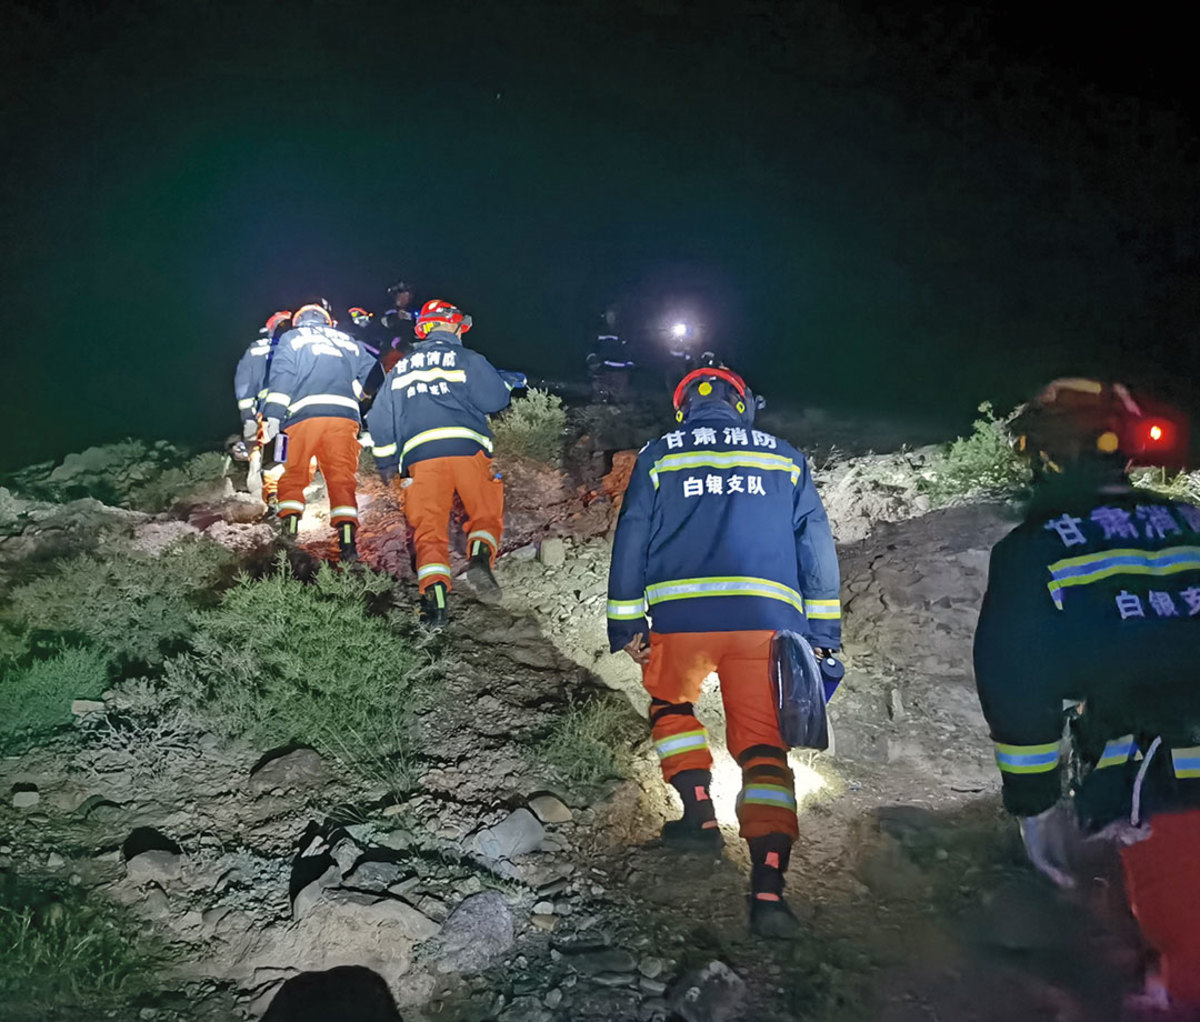 Rescue workers climbing hill in dark